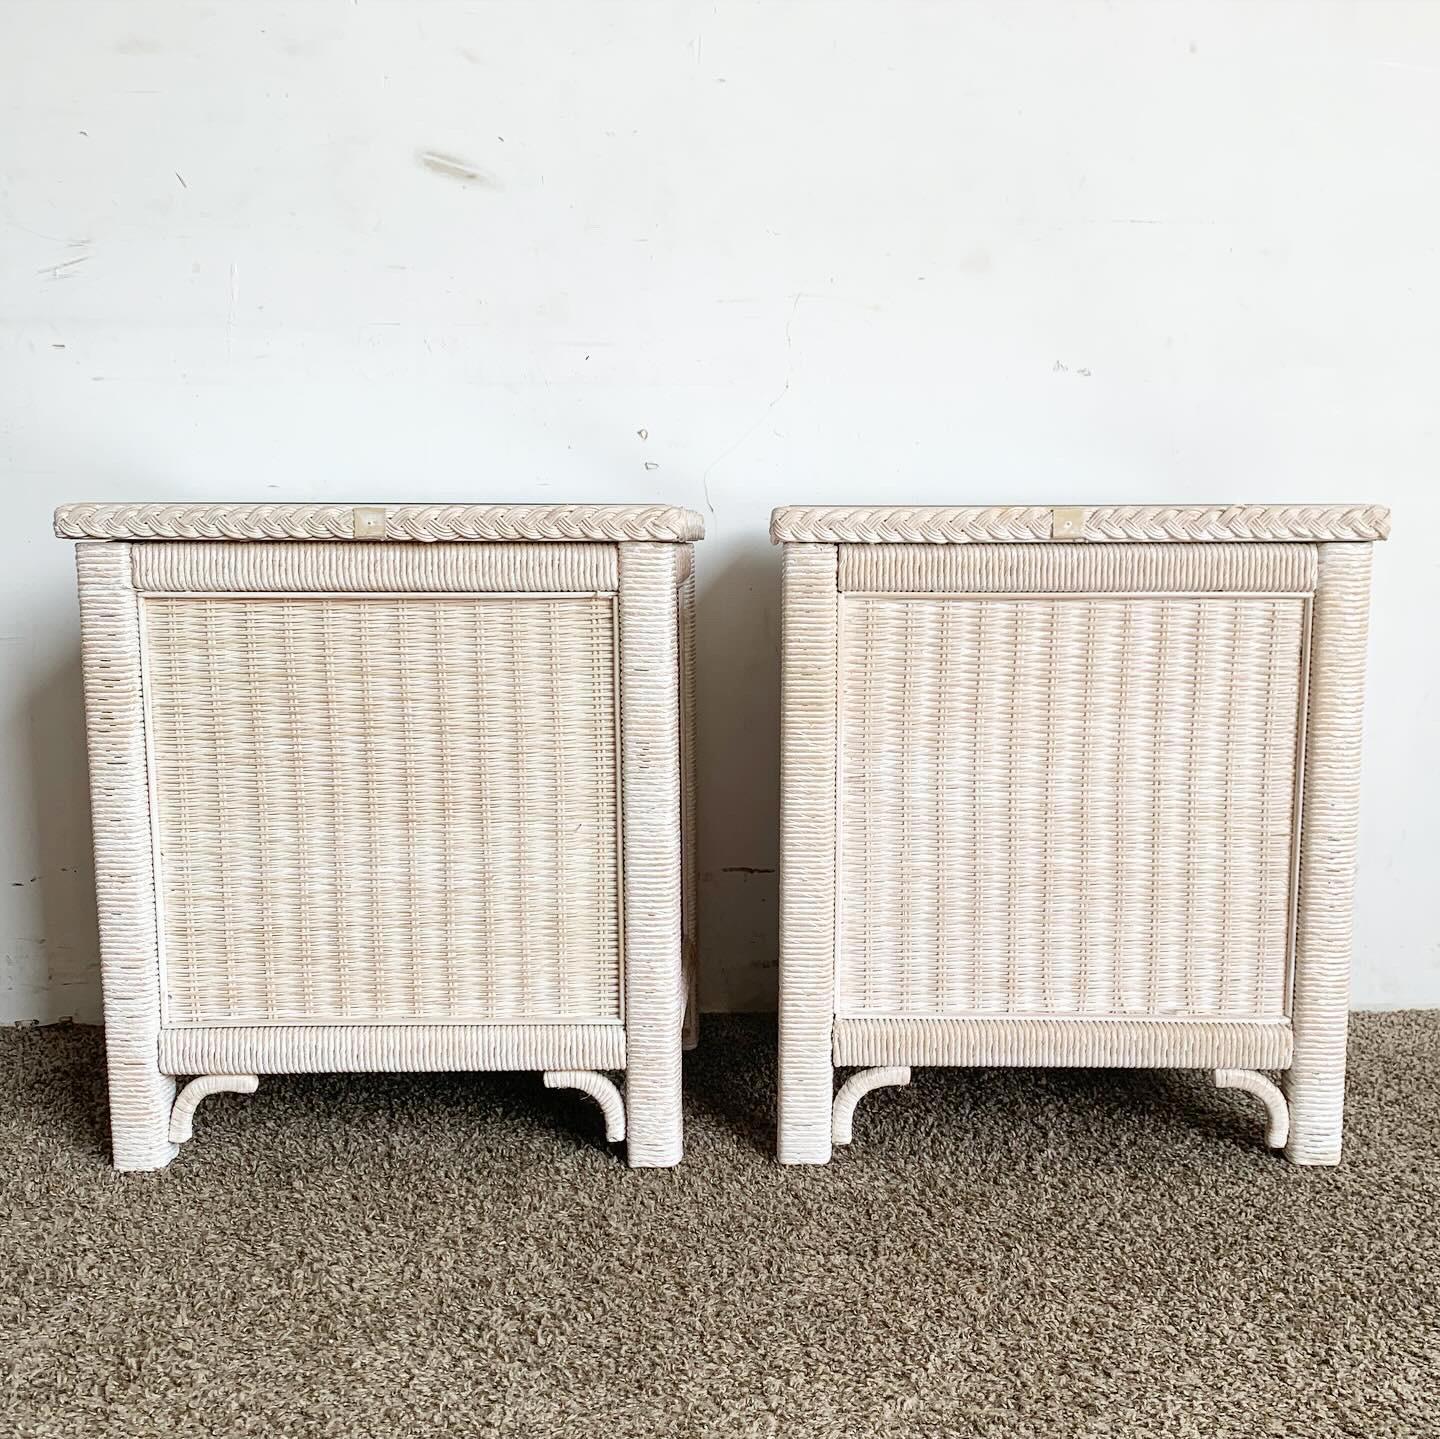 Elevate your bedroom with White Washed Wicker Rattan Nightstands by Lexington, a delightful pair that combines relaxed elegance with practical bedside storage, making them a charming addition to your decor.
Minor wear around the edges as seen in the